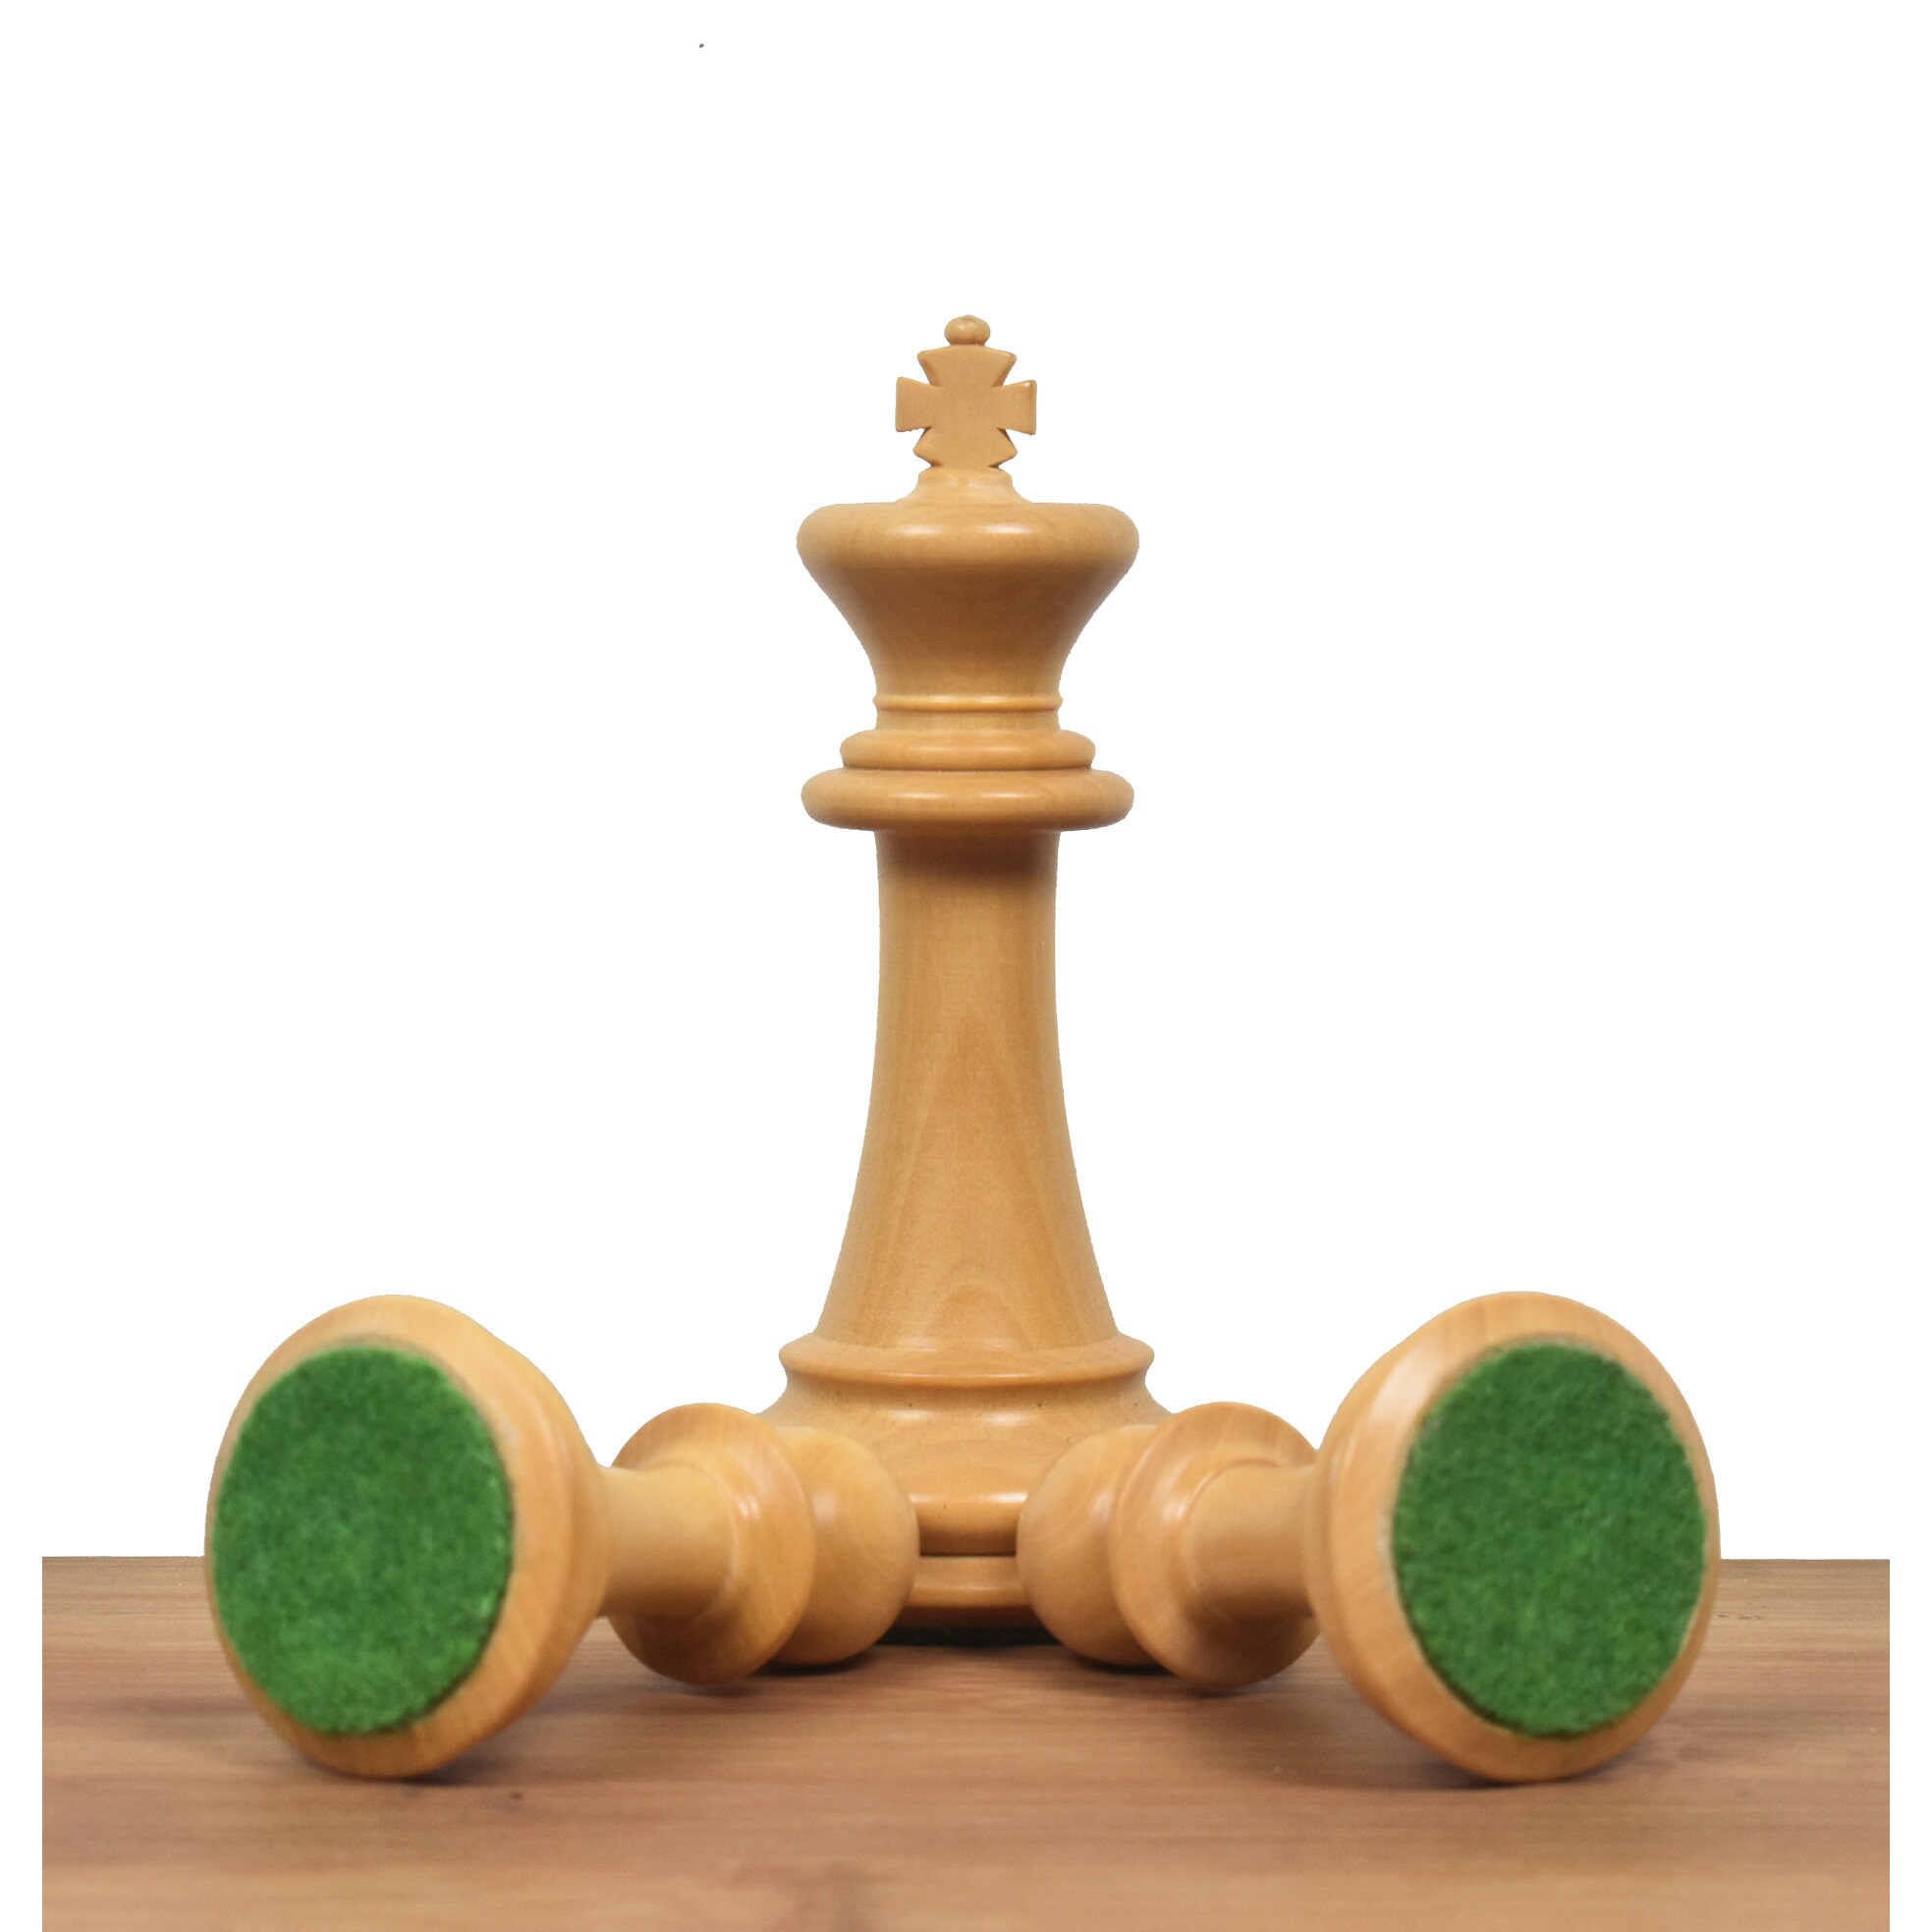 Details about   3.7" Emperor Series Staunton Chess Pieces Only set Double Weighted Ebony Wood 